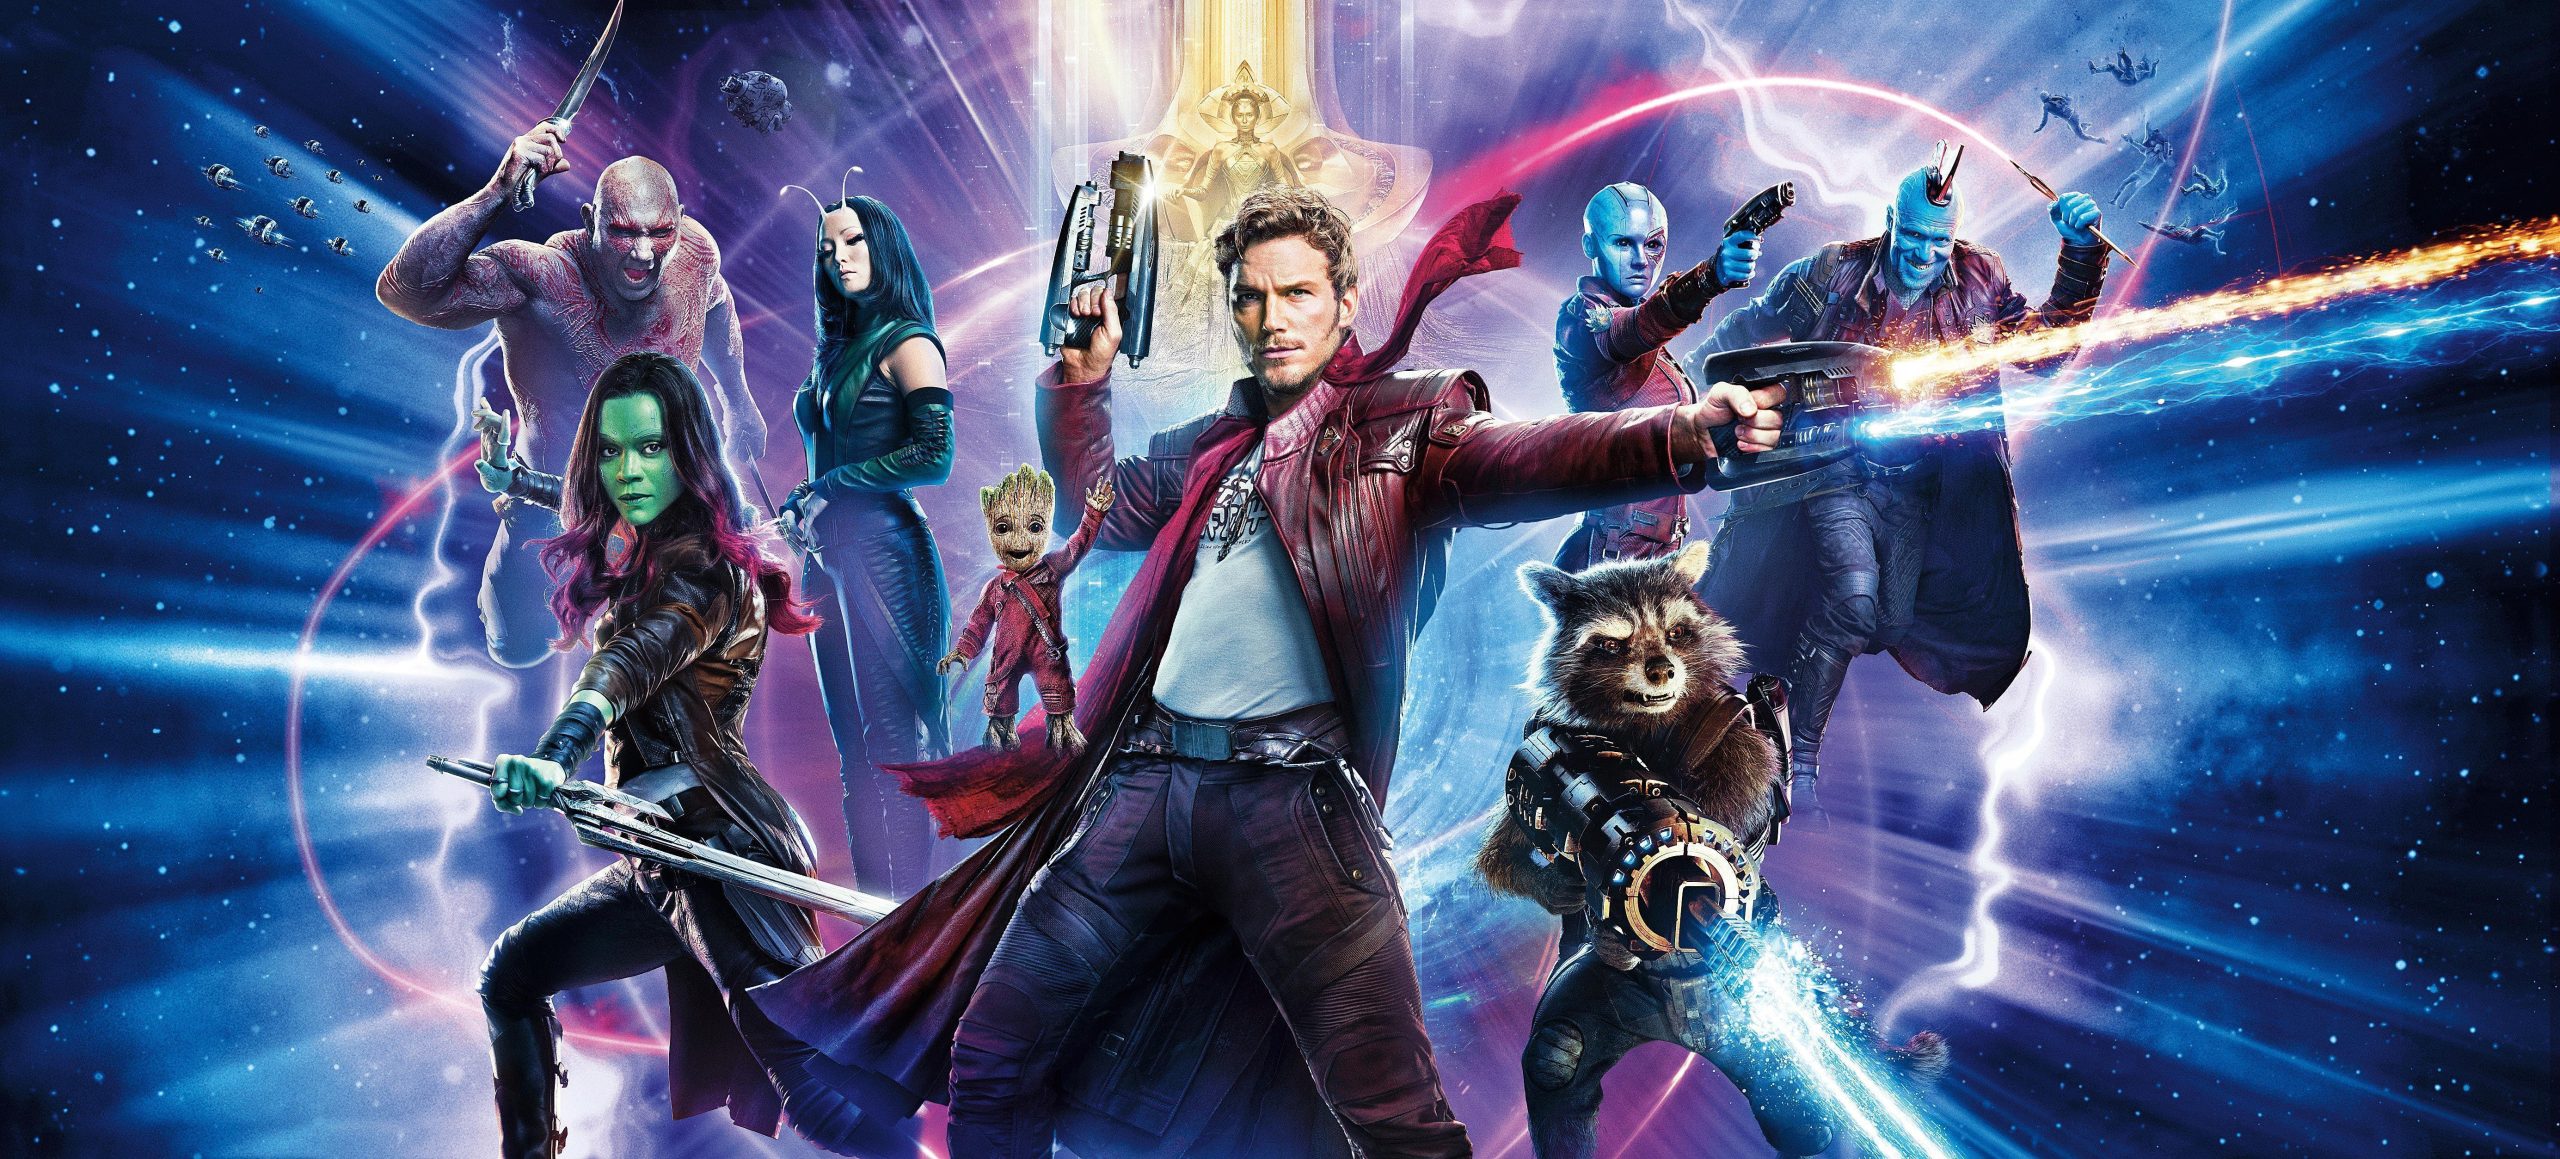 Guardians Of The Galaxy 2 Download Wallpaper, Guardians Of The Galaxy 2, Movies